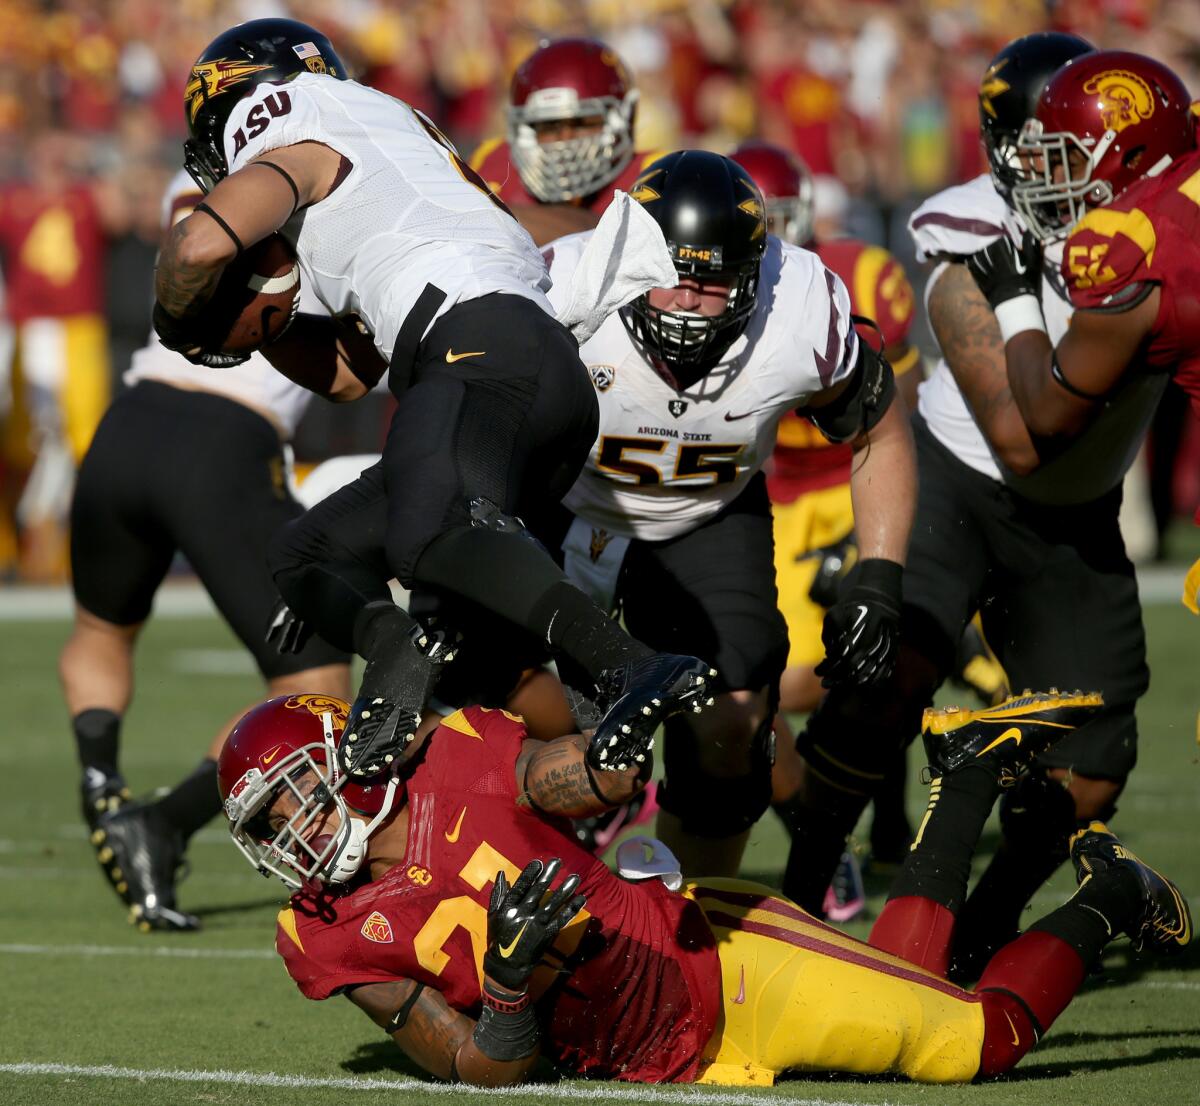 USC defensive back Su'a Cravens brings down Sun Devils quarterback Mike Bercovici during a game at the Coliseum on Oct. 4.